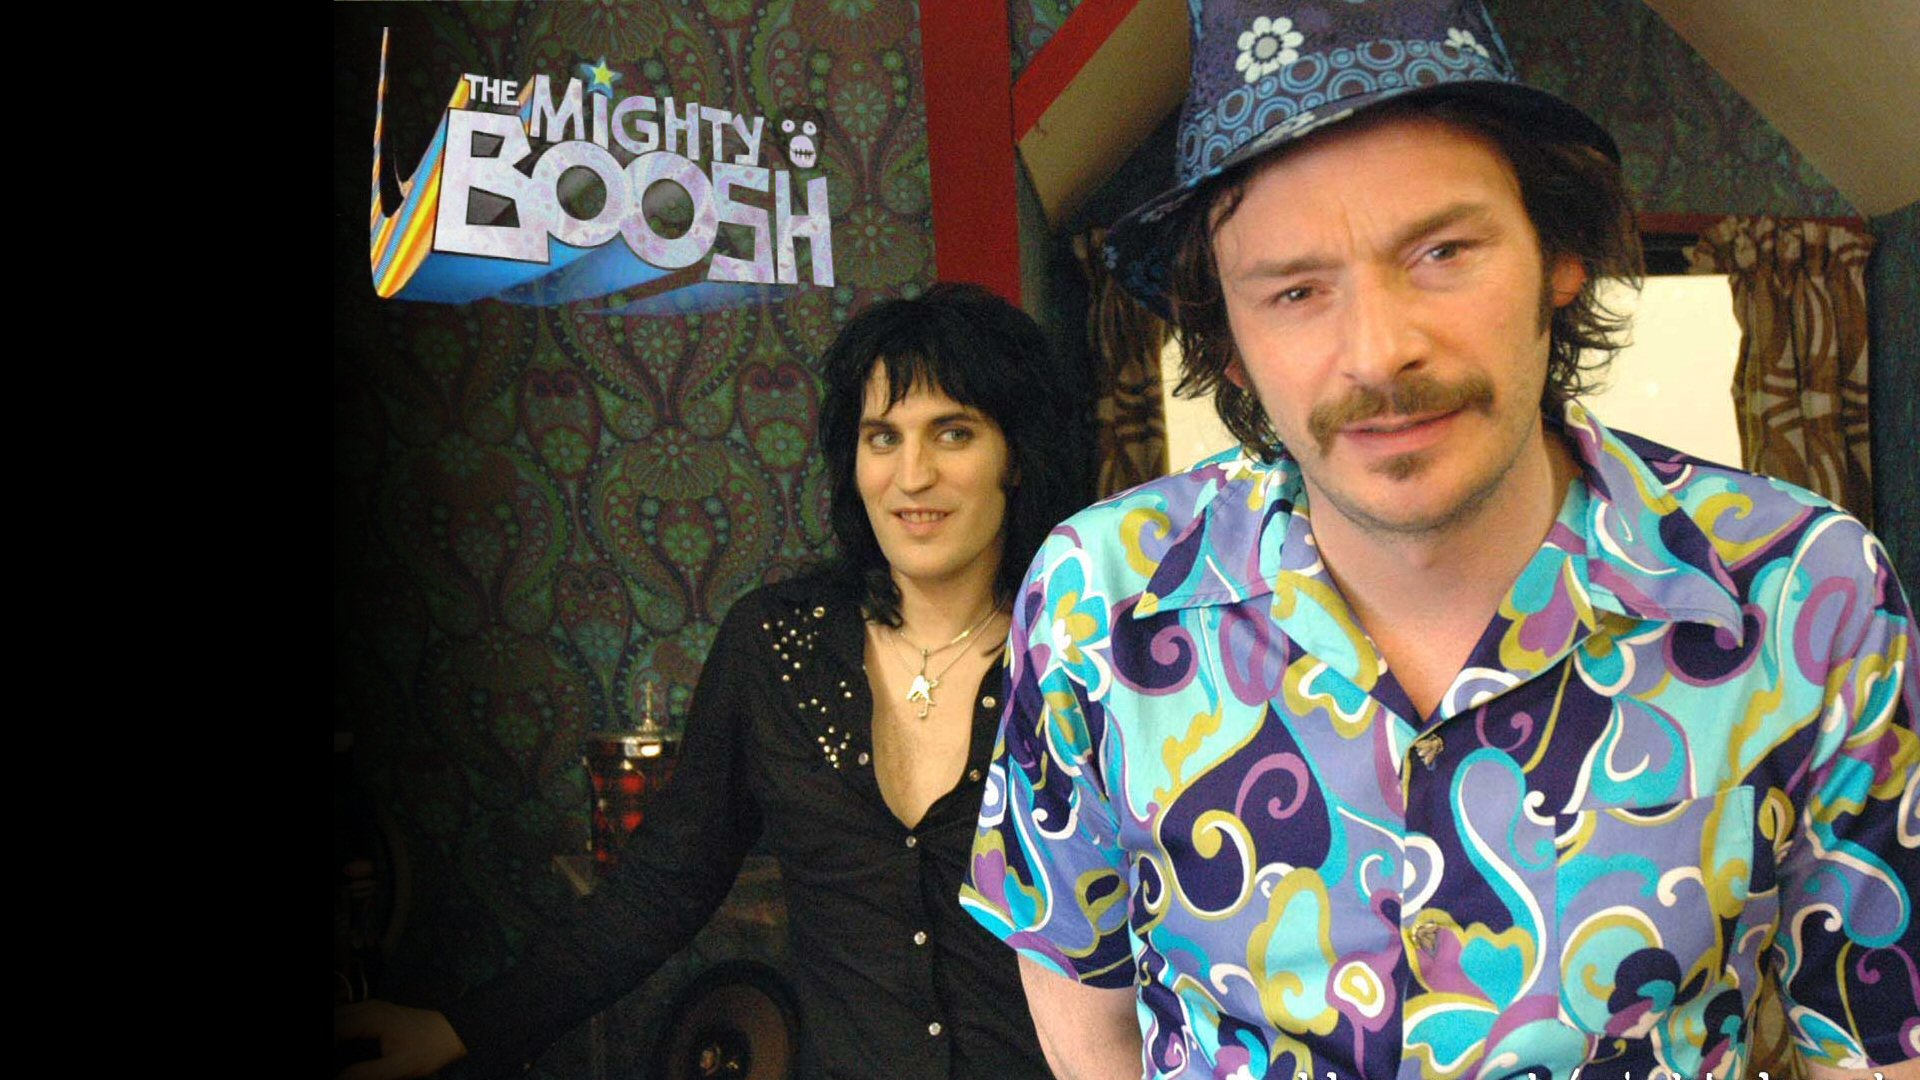 Coby's Blog: mighty boosh wallpaper.